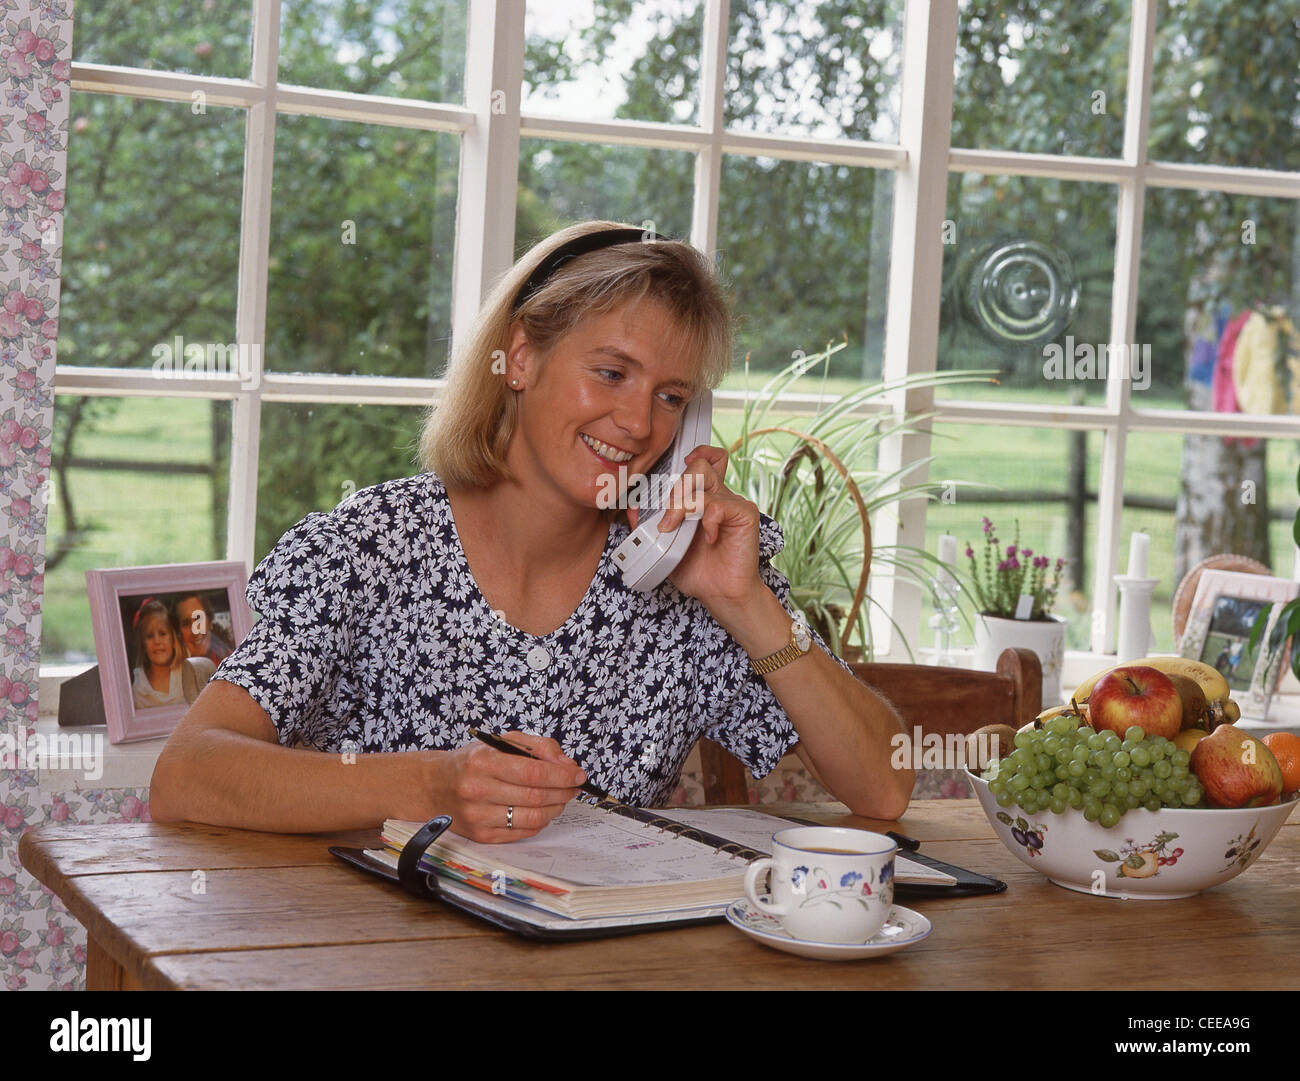 Young woman on portable phone, Berkshire, England, United Kingdom Stock Photo